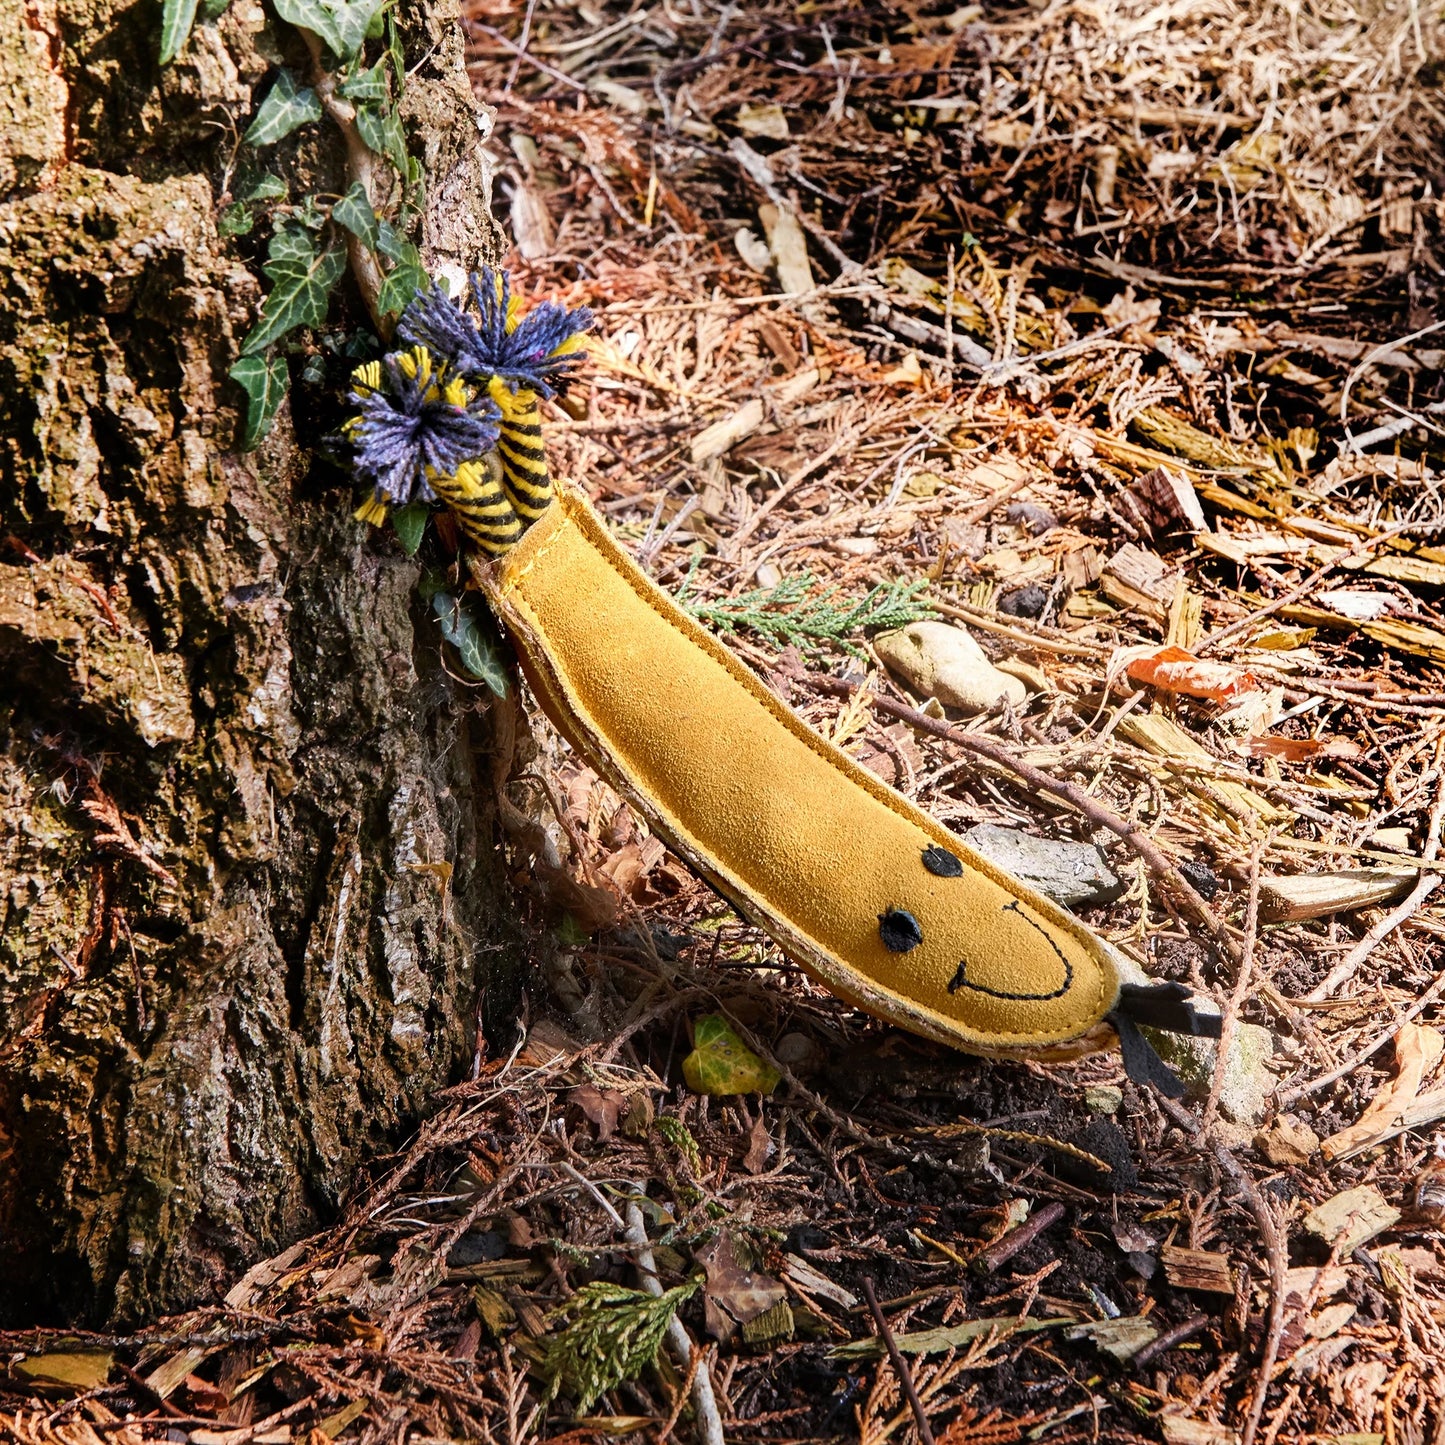 Eco Toy - Barry the Banana